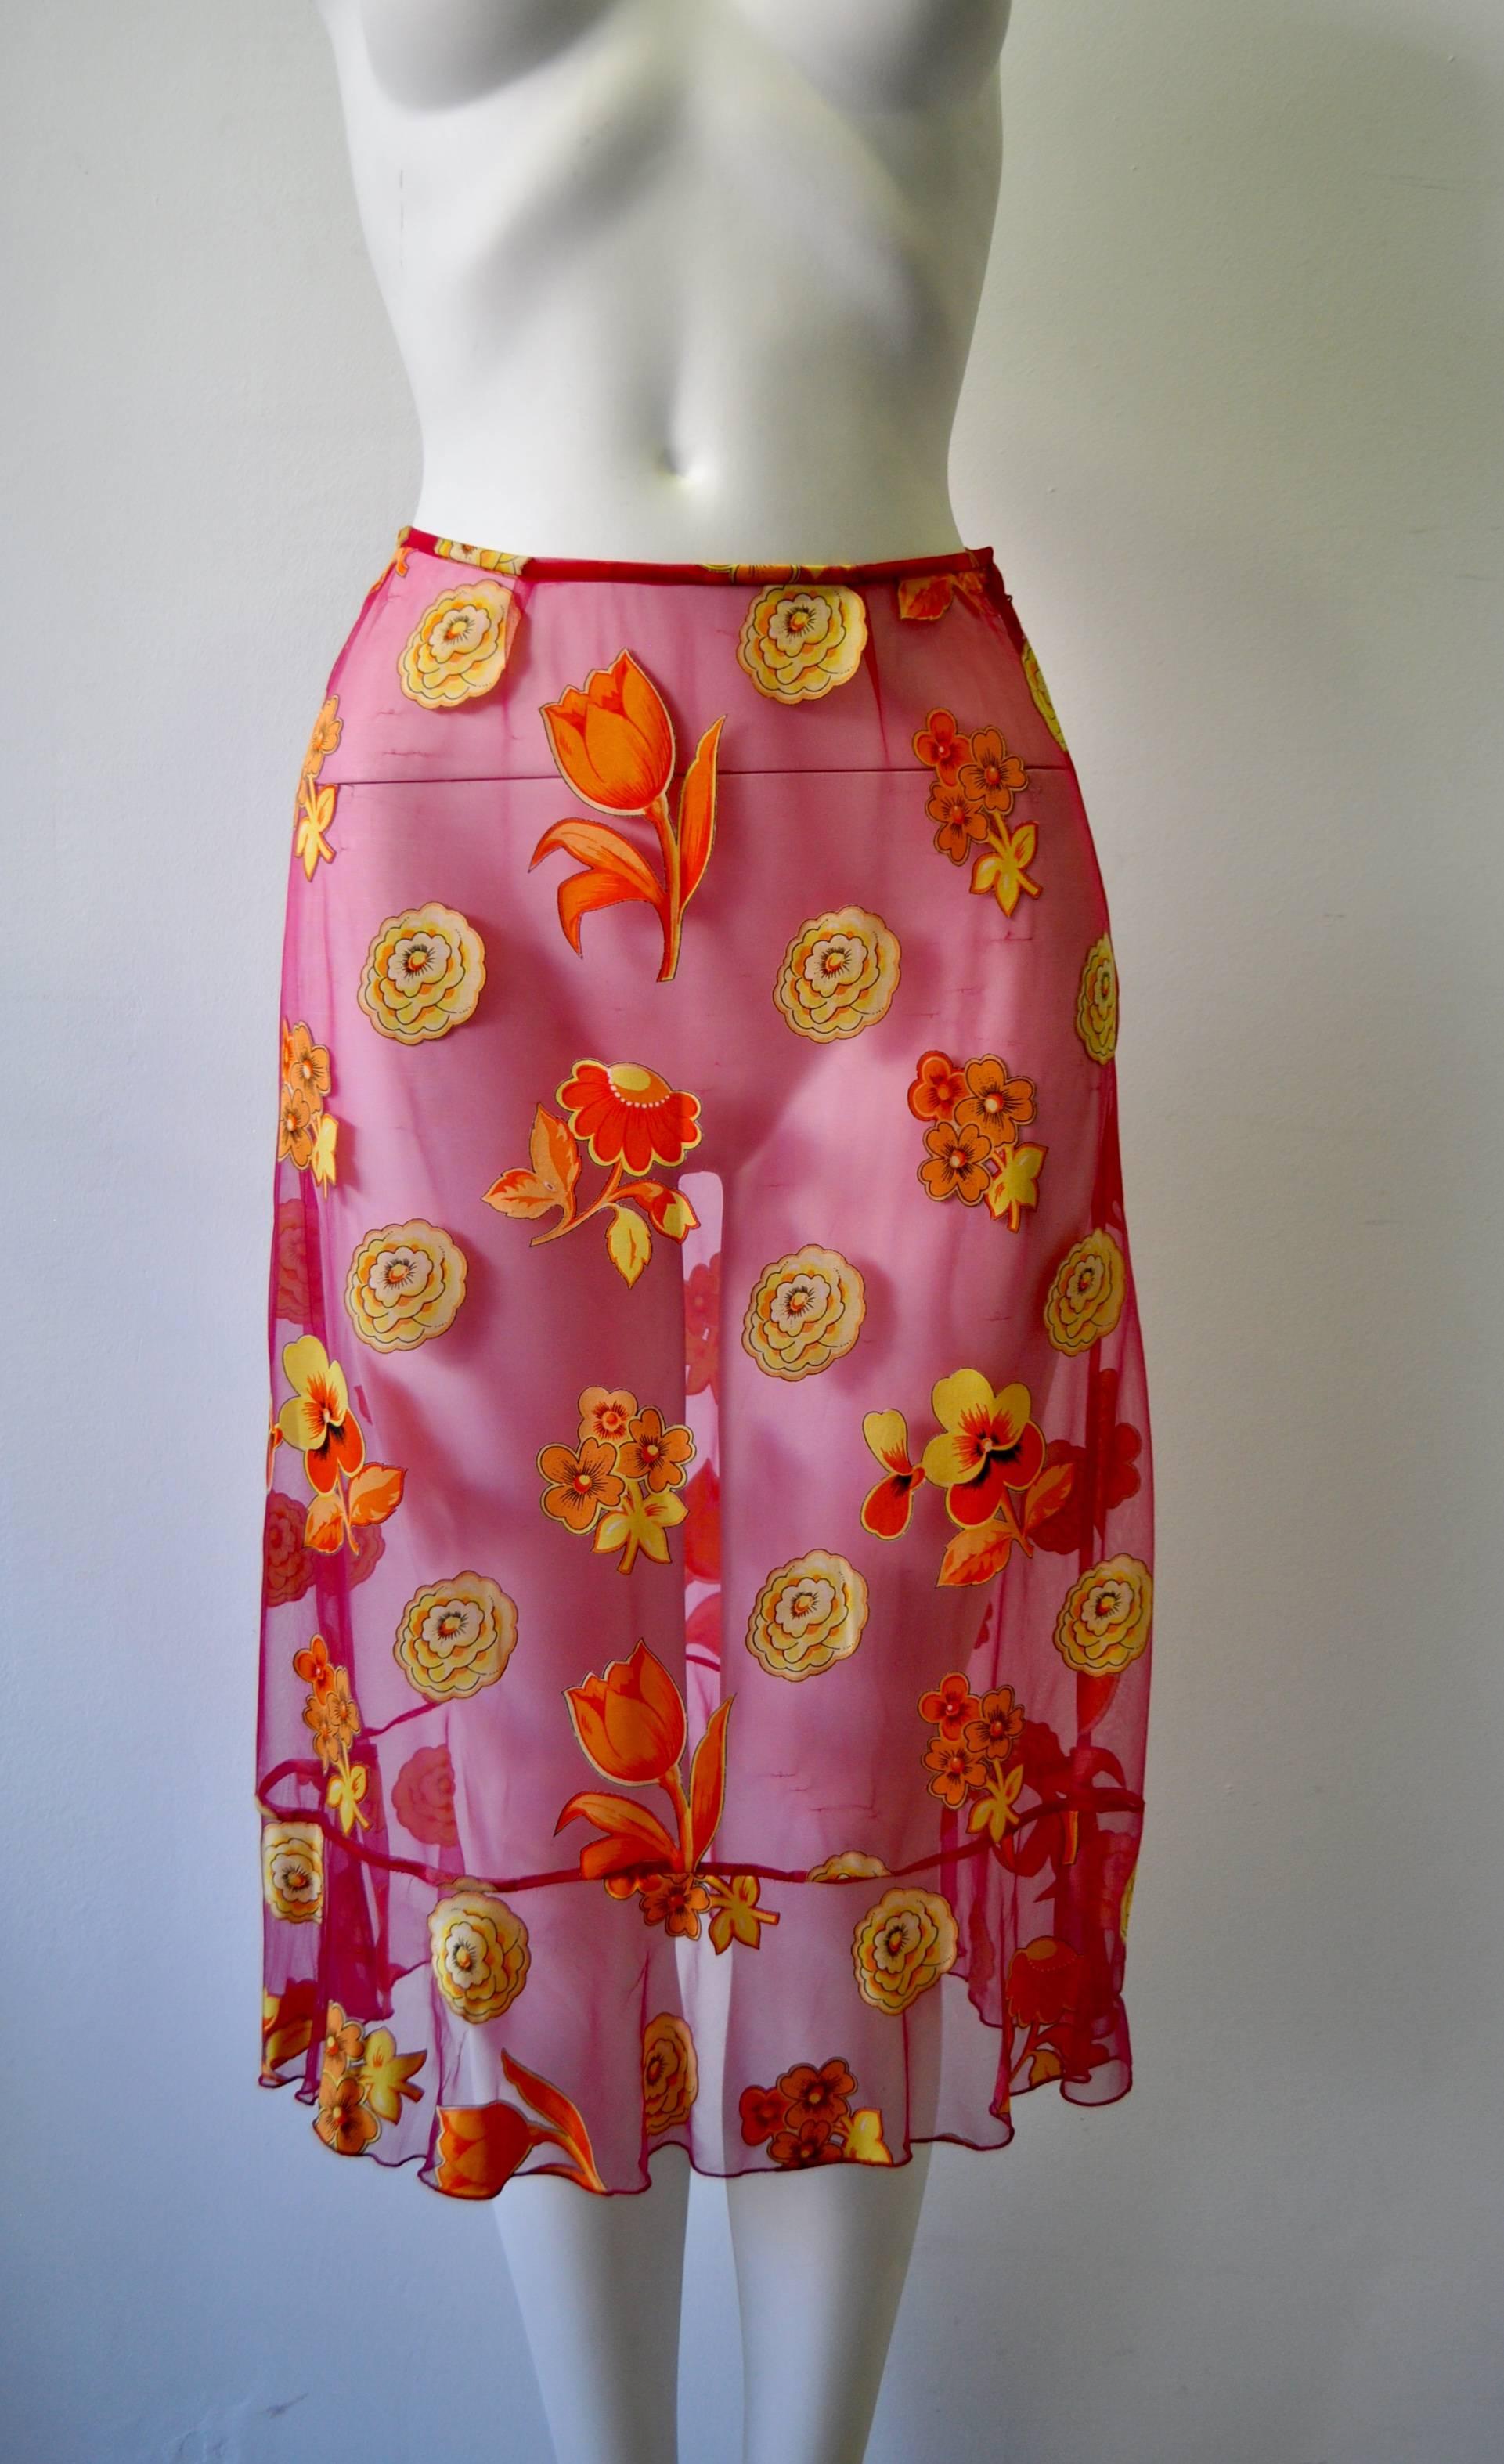 Brown Very Rare Gianni Versace Istante Sheer Floral Peplum Top Skirt Ensemble For Sale